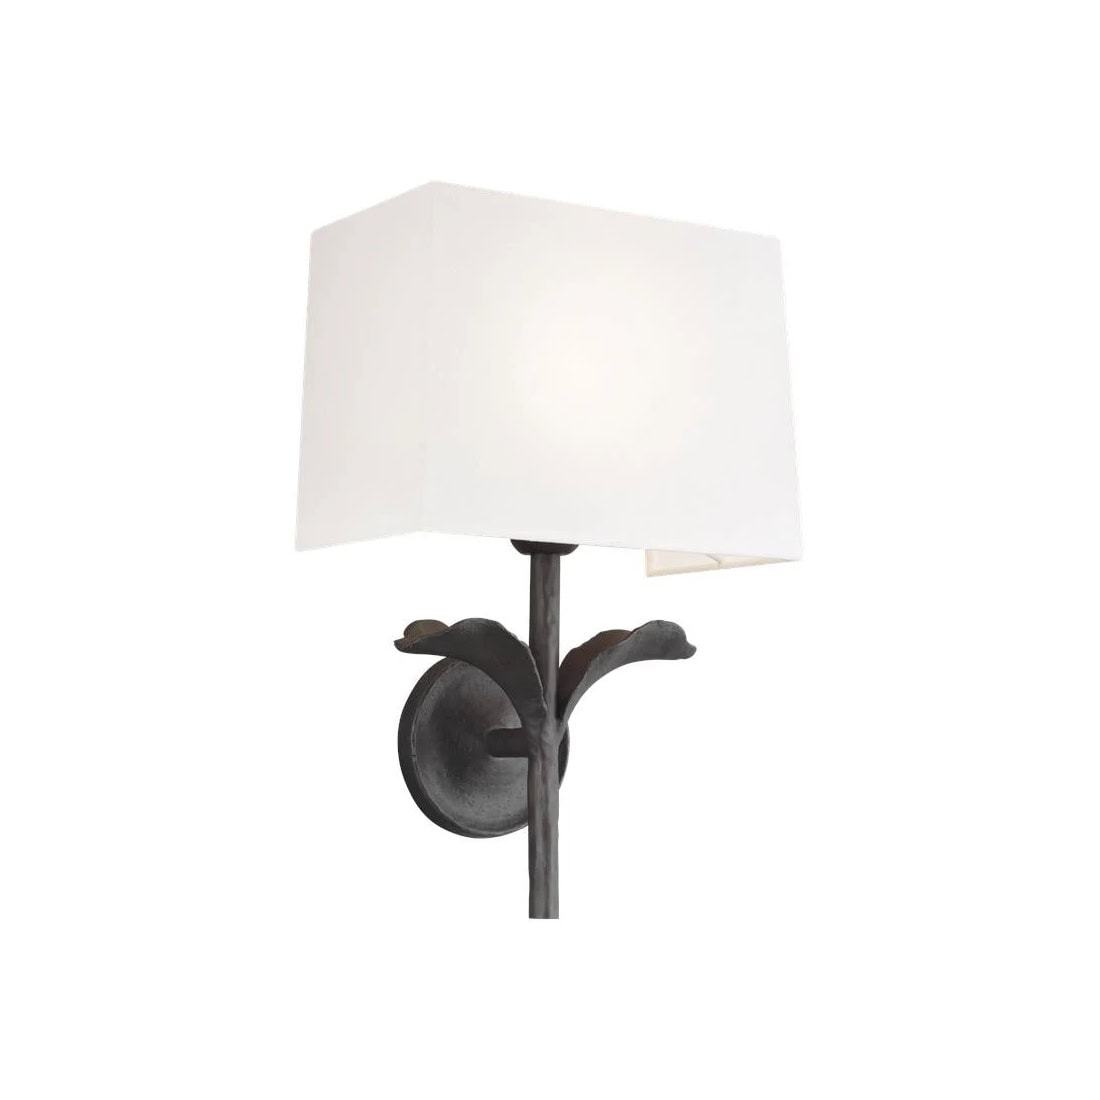 Product Image of Georgia Wall Light Aged Iron with White Linen Shade